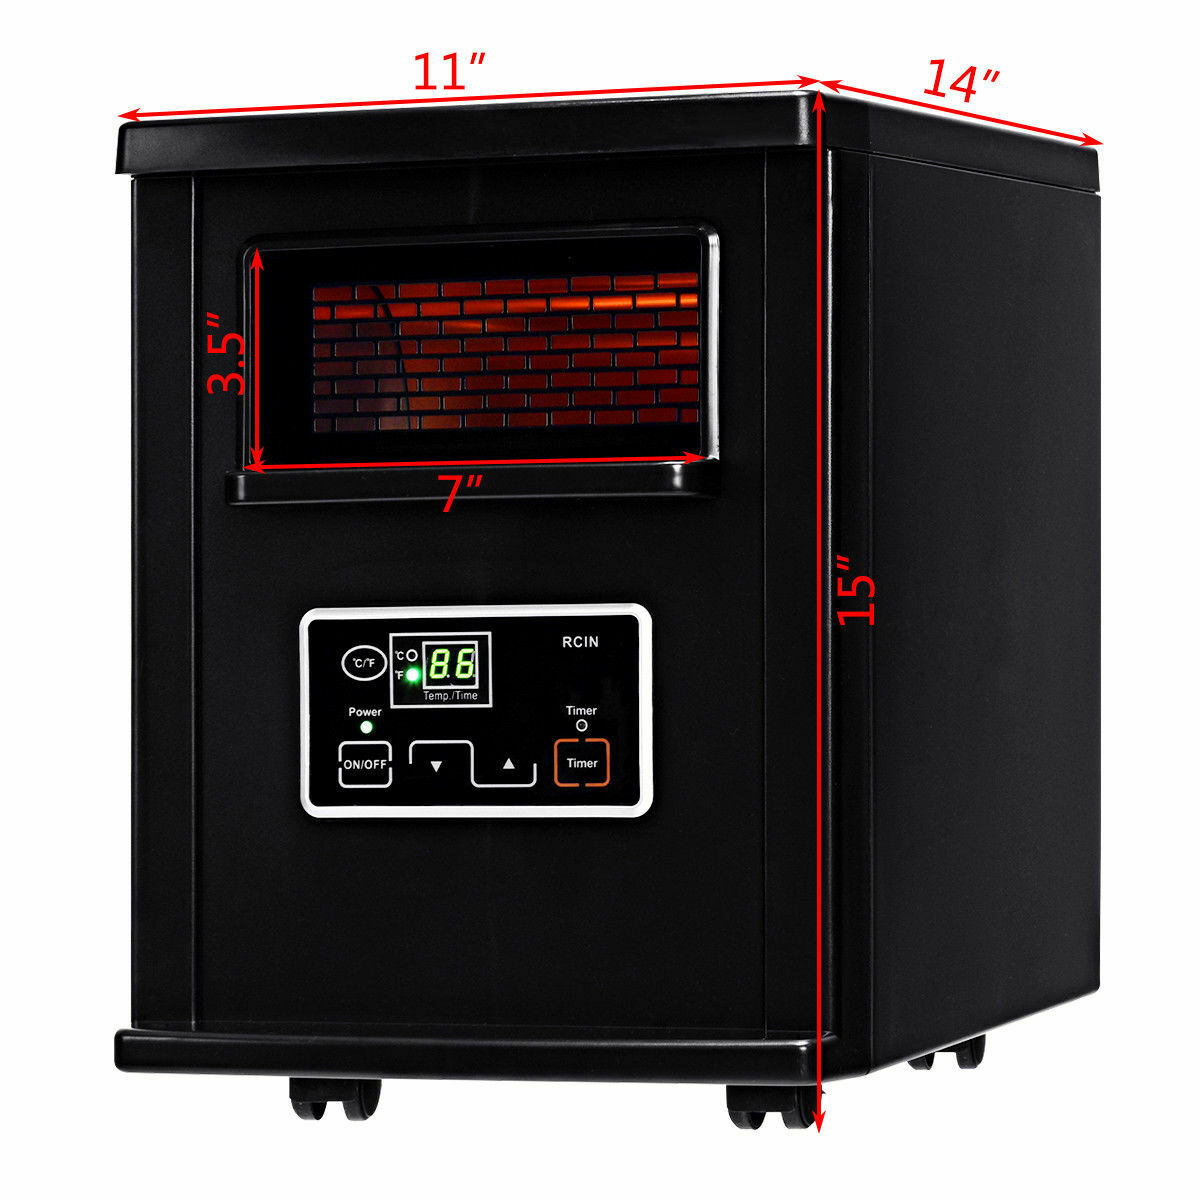 Remote Control 1500W Electric Heater Portable Infrared Space Heating Machine W/ LED Display Black